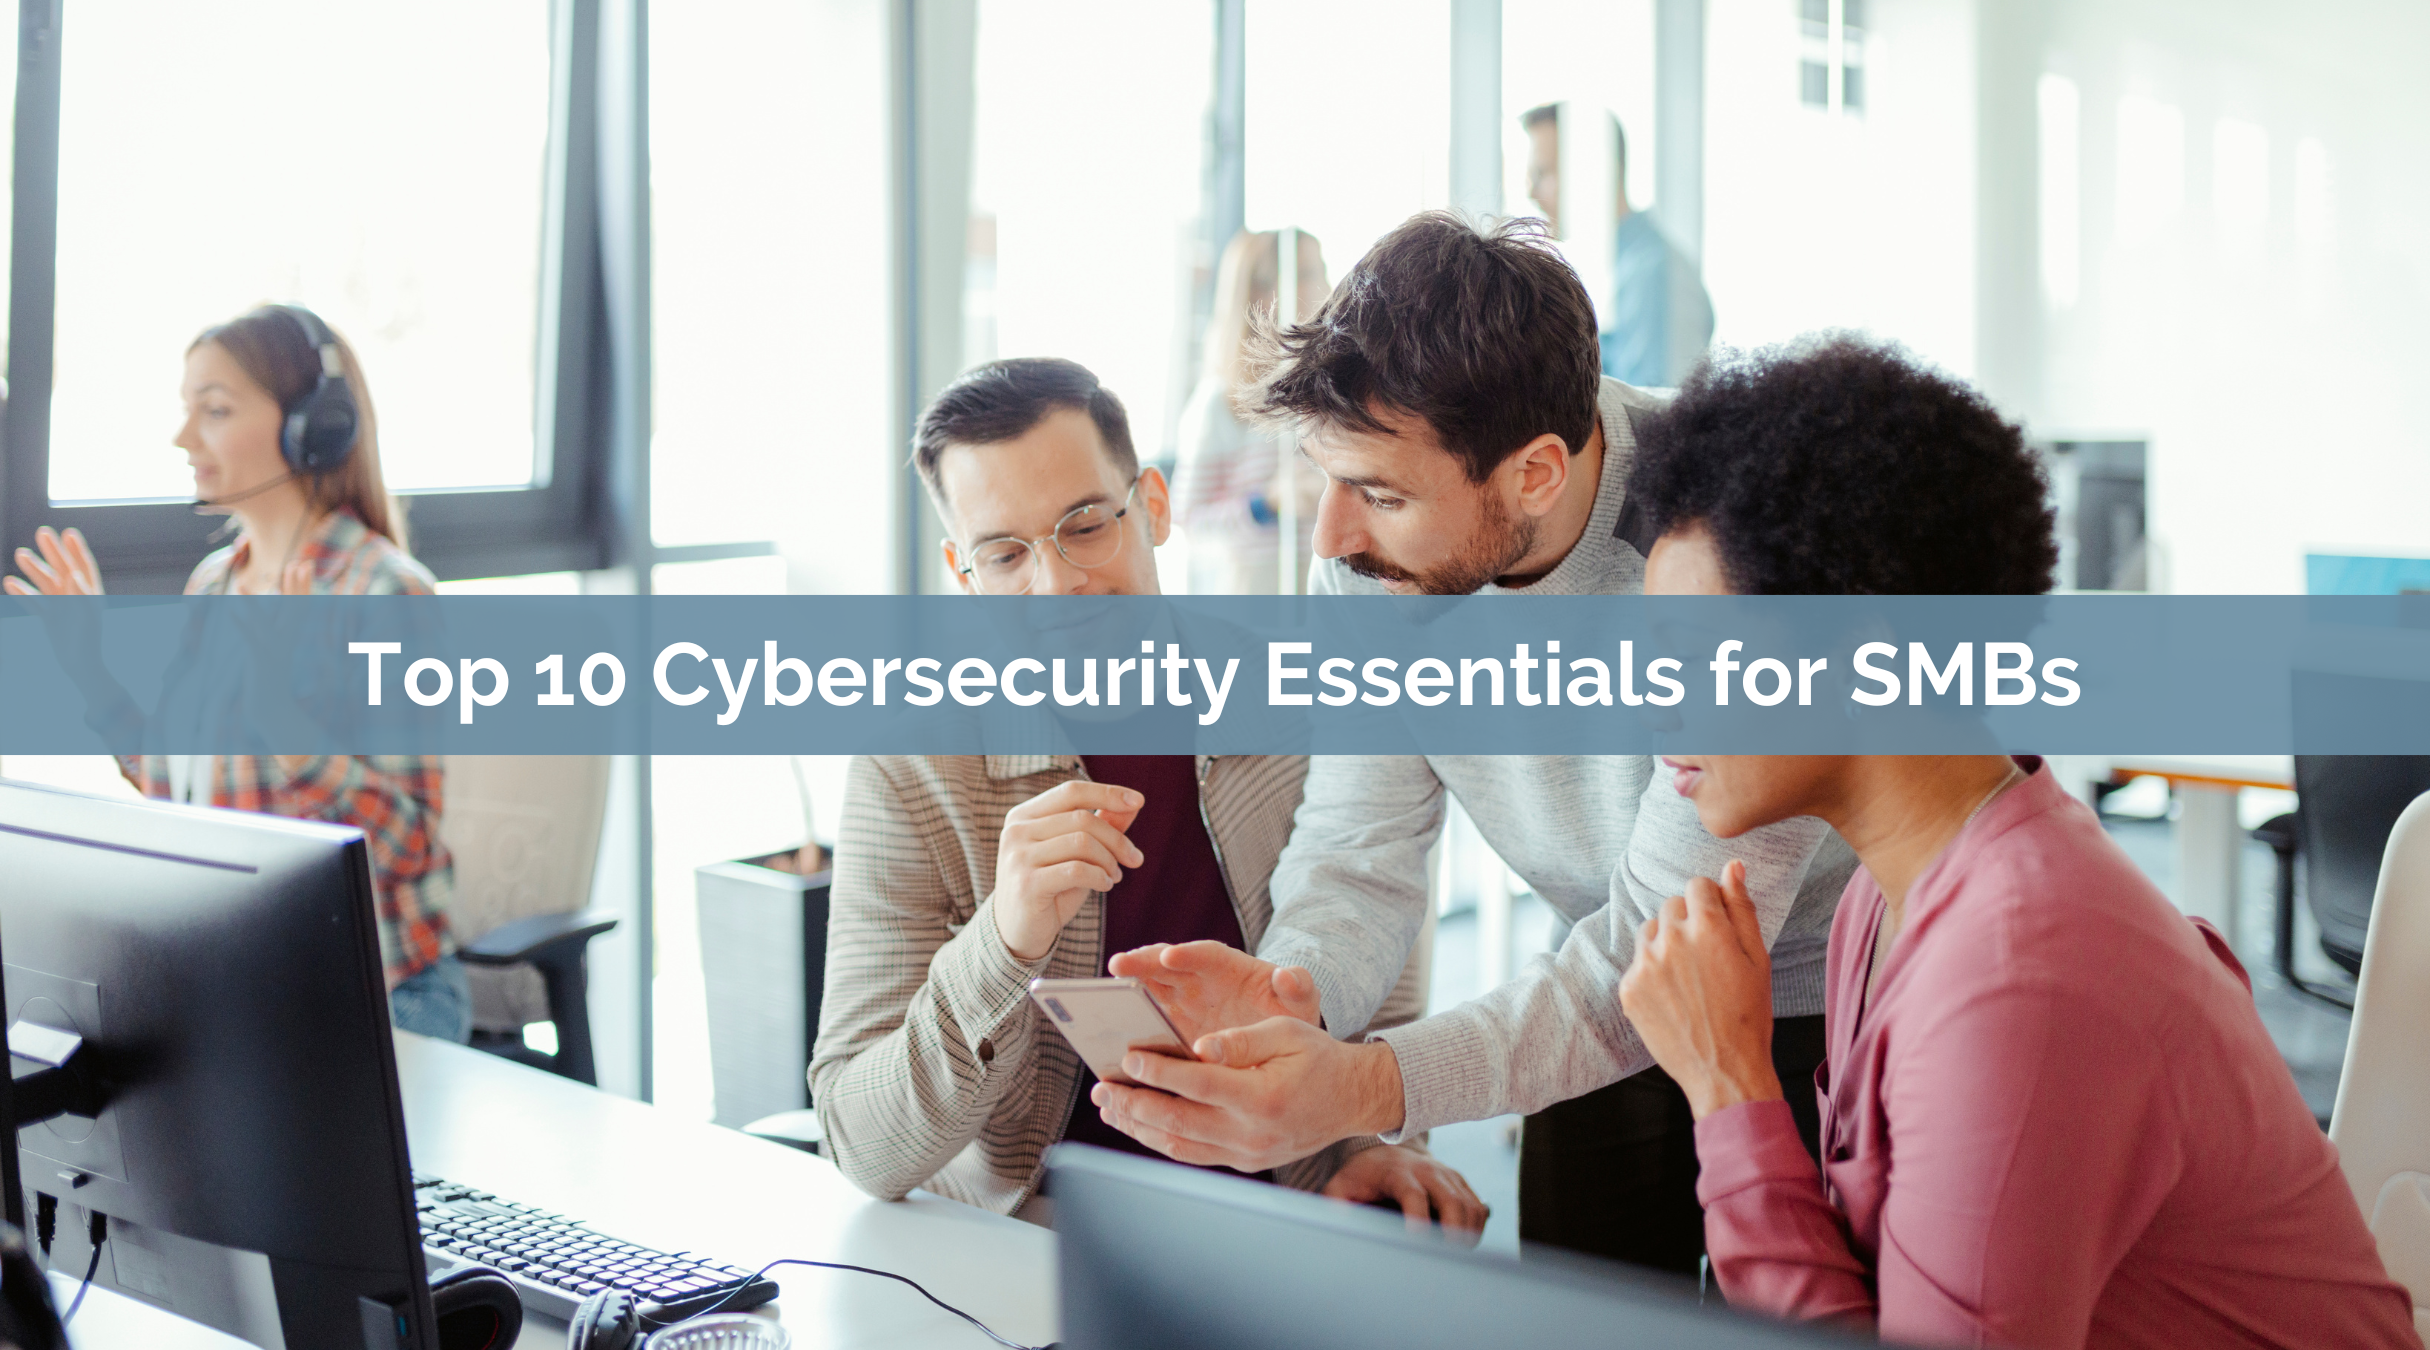 Top 10 Cybersecurity Essentials for SMBs 